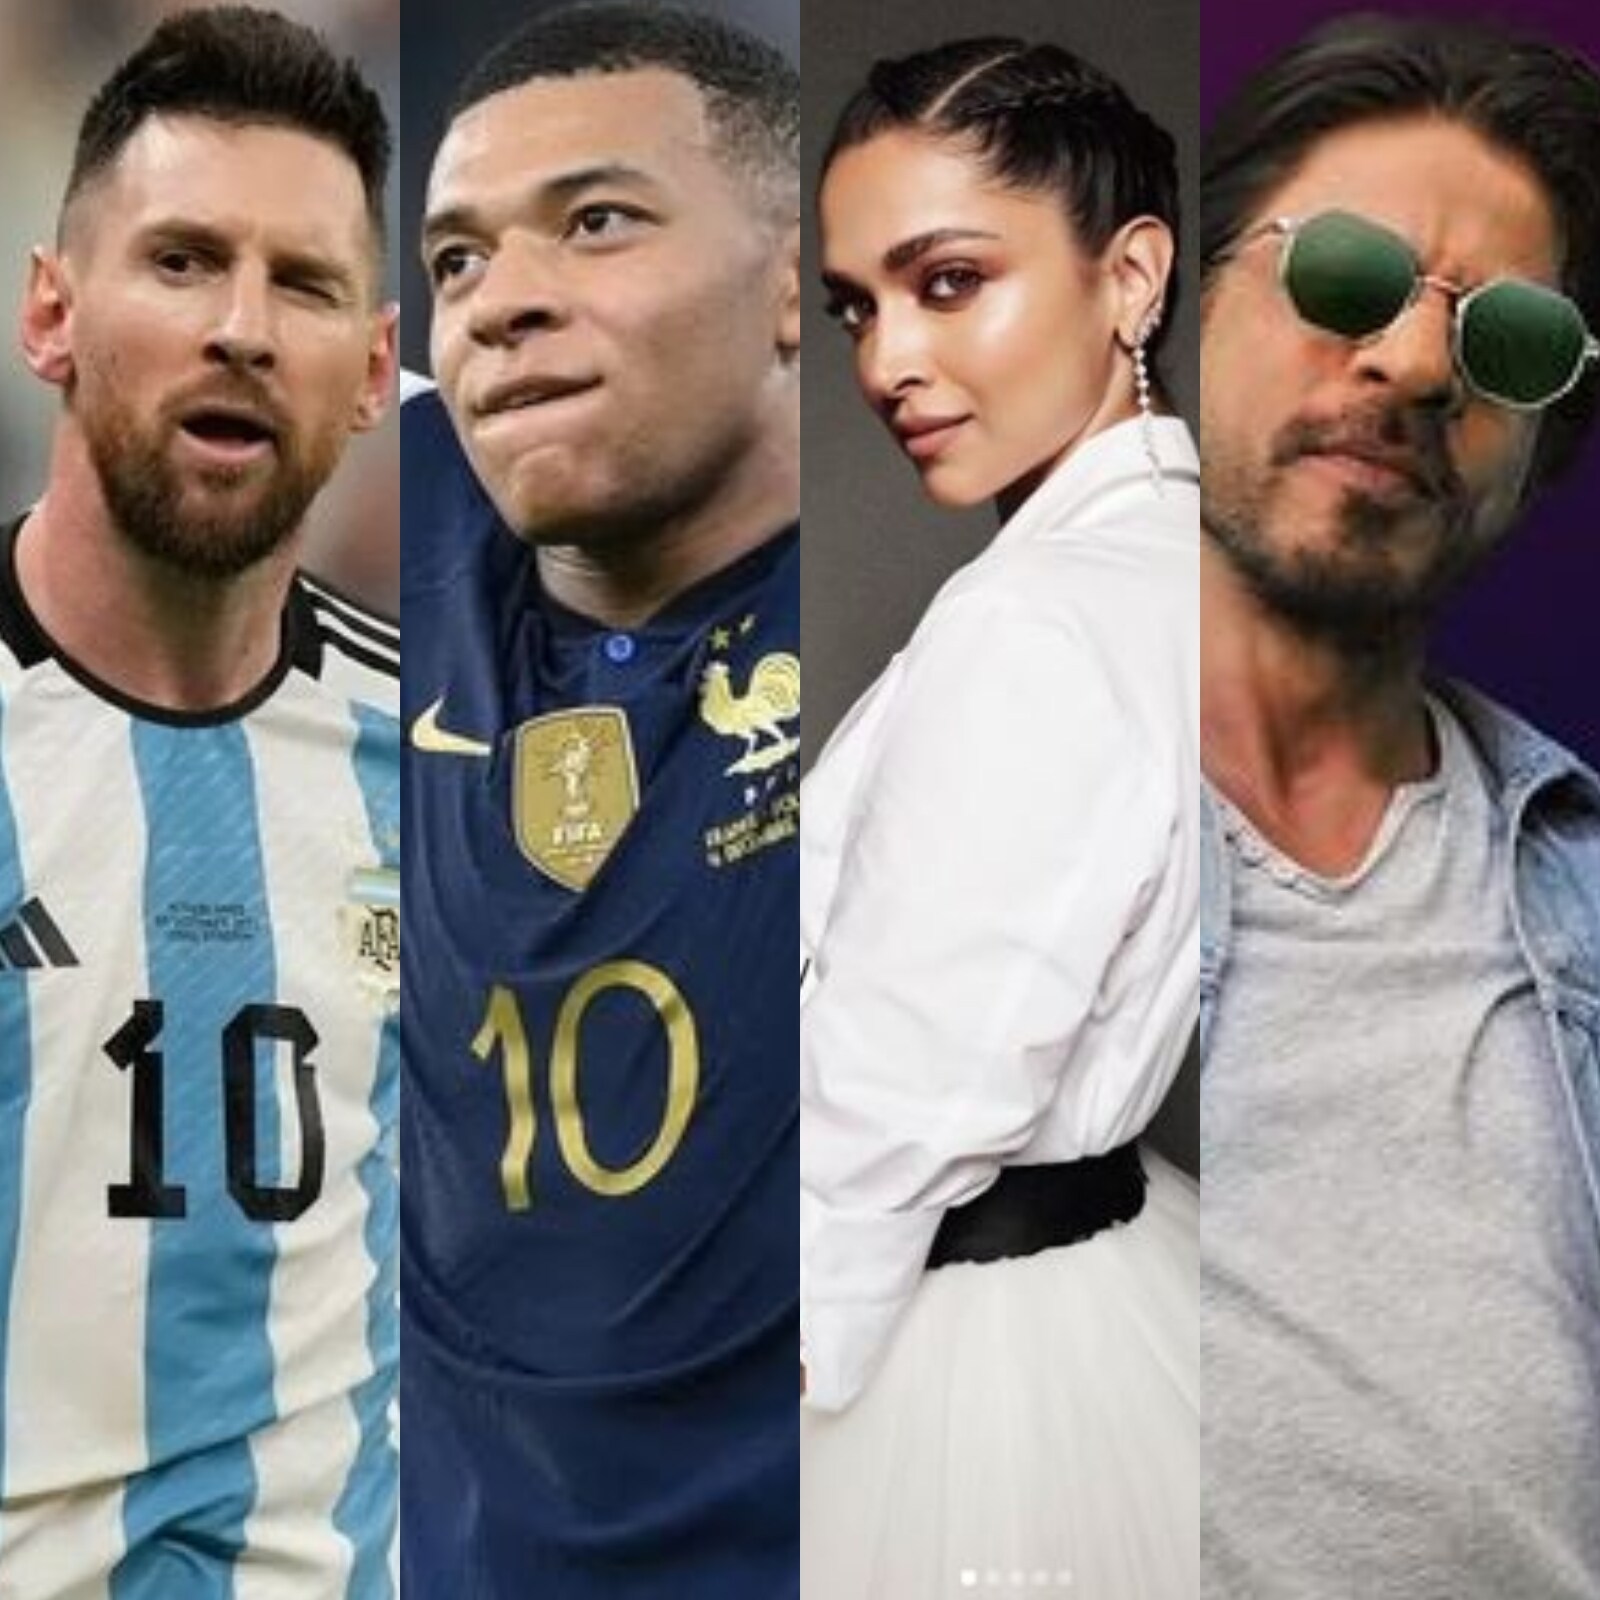 SRK to appear during FIFA World Cup final between Argentina